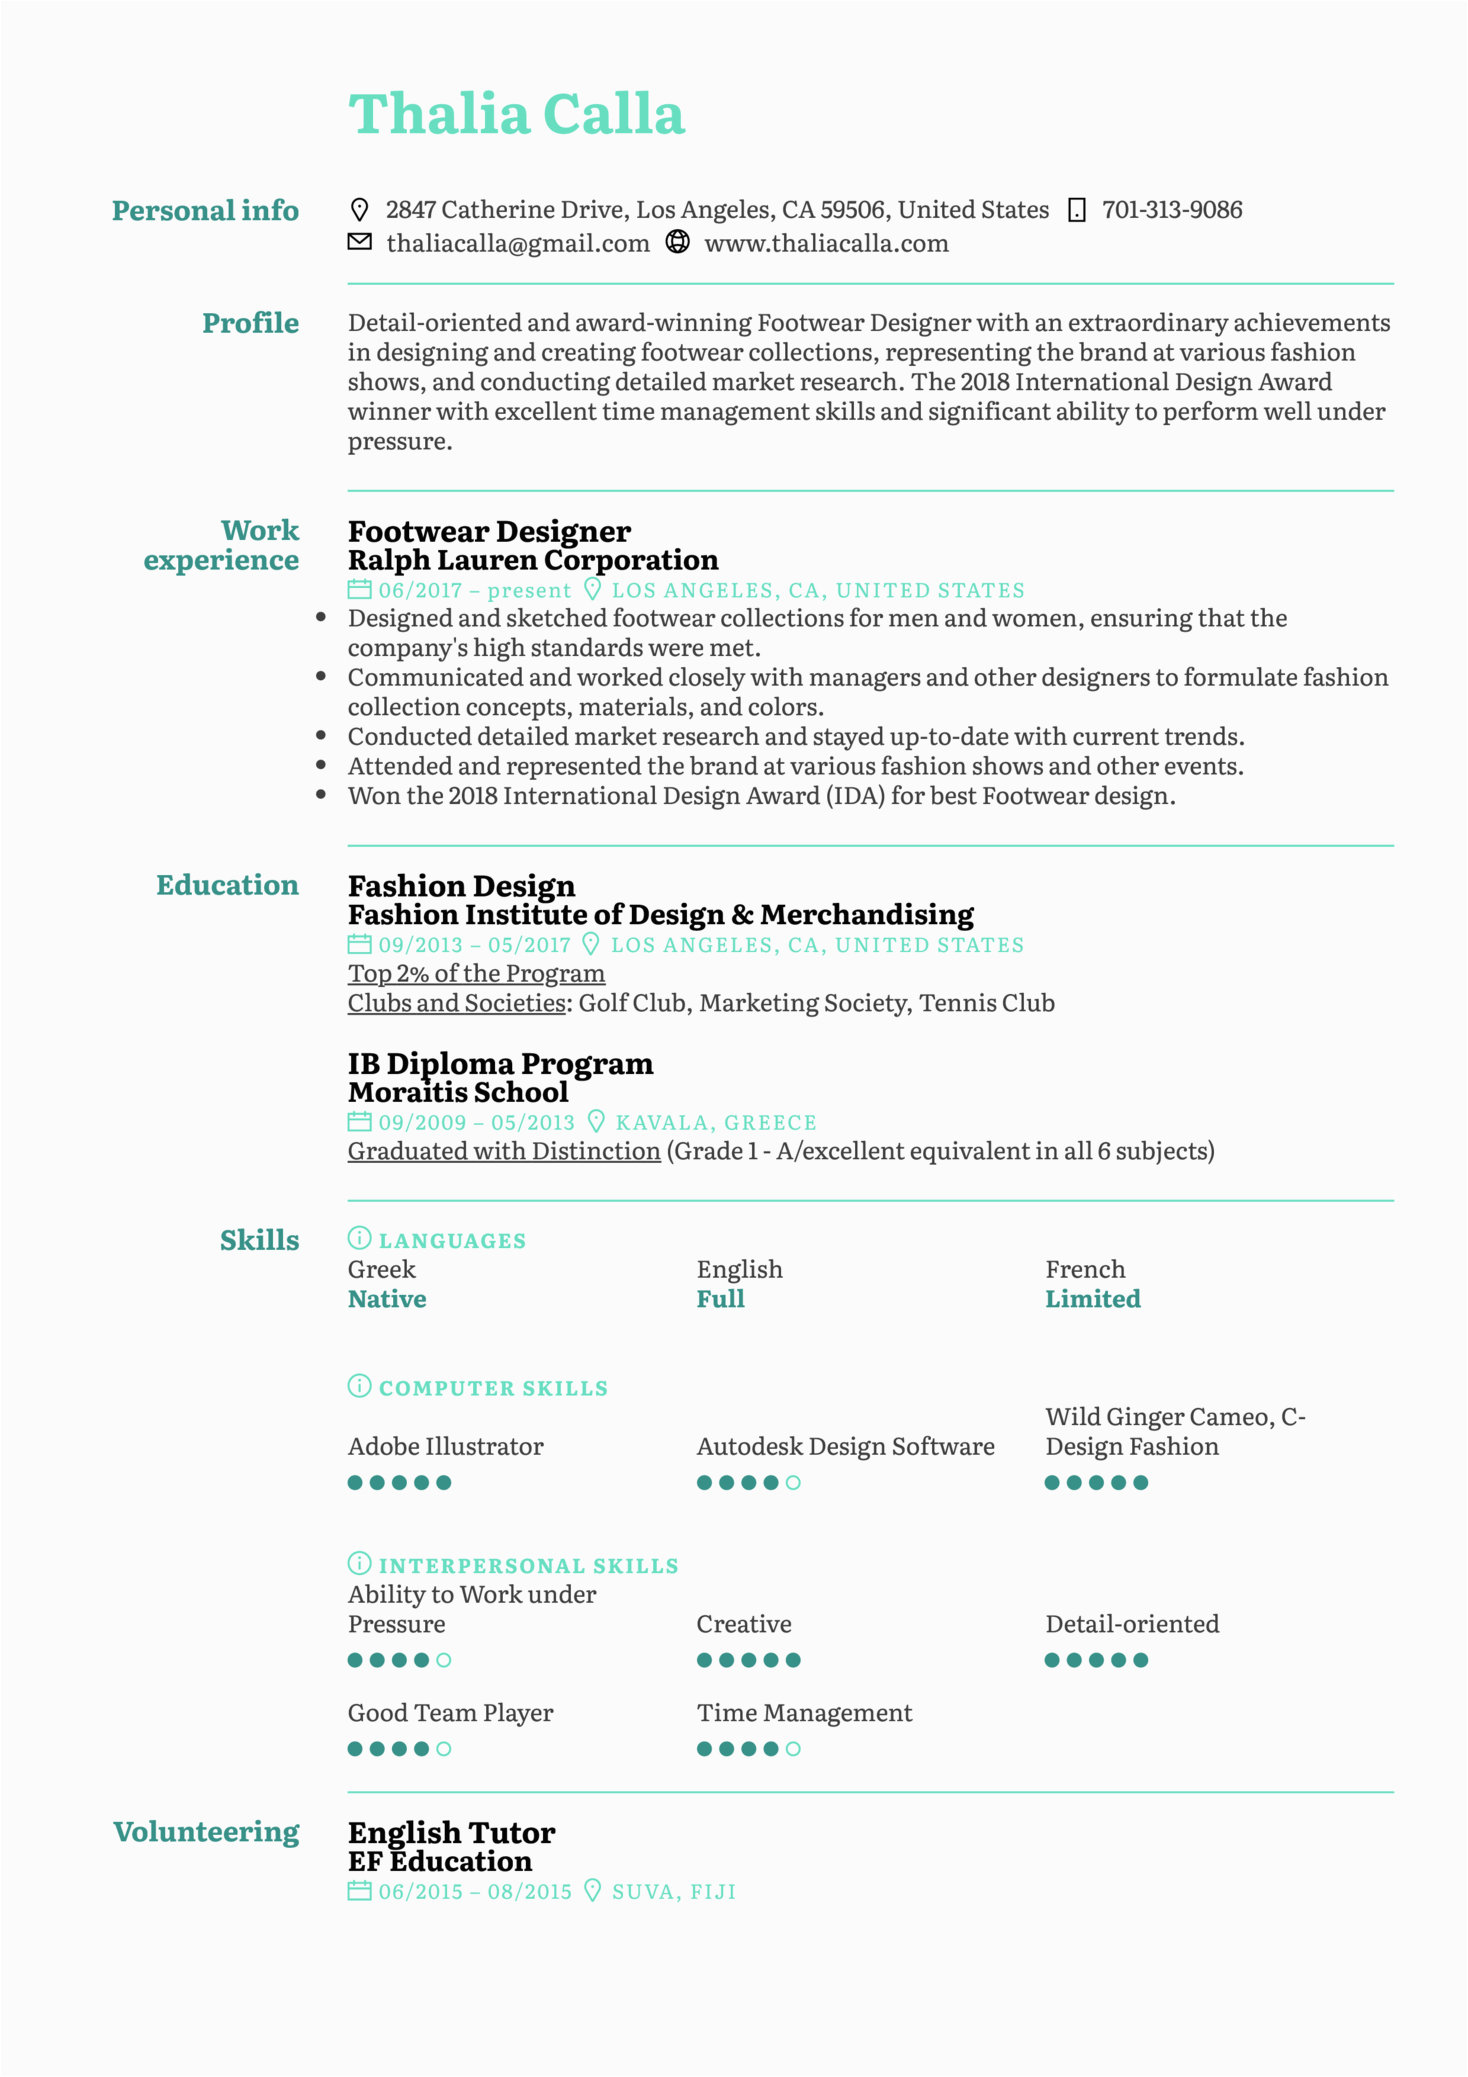 Resume Sample for University Application Fashion Design Fashion Designer Skills Resume Highly Proficient with Adobe